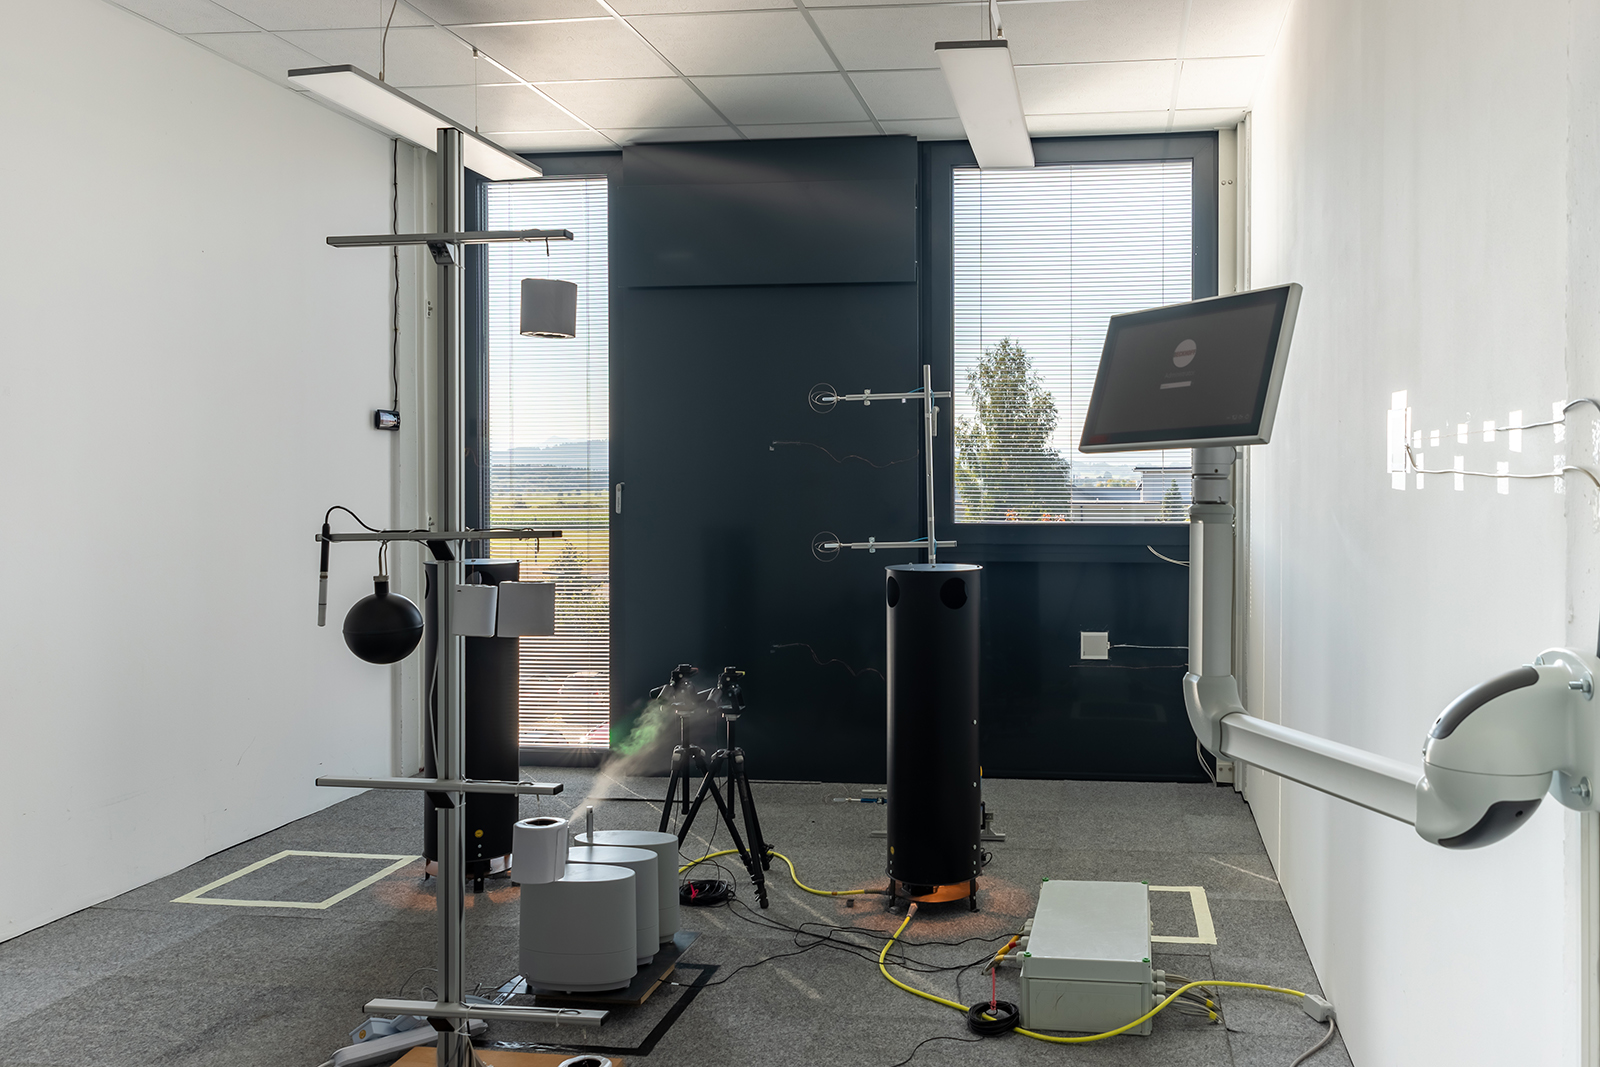 View of the test room behind the modular facade containing measuring instruments.